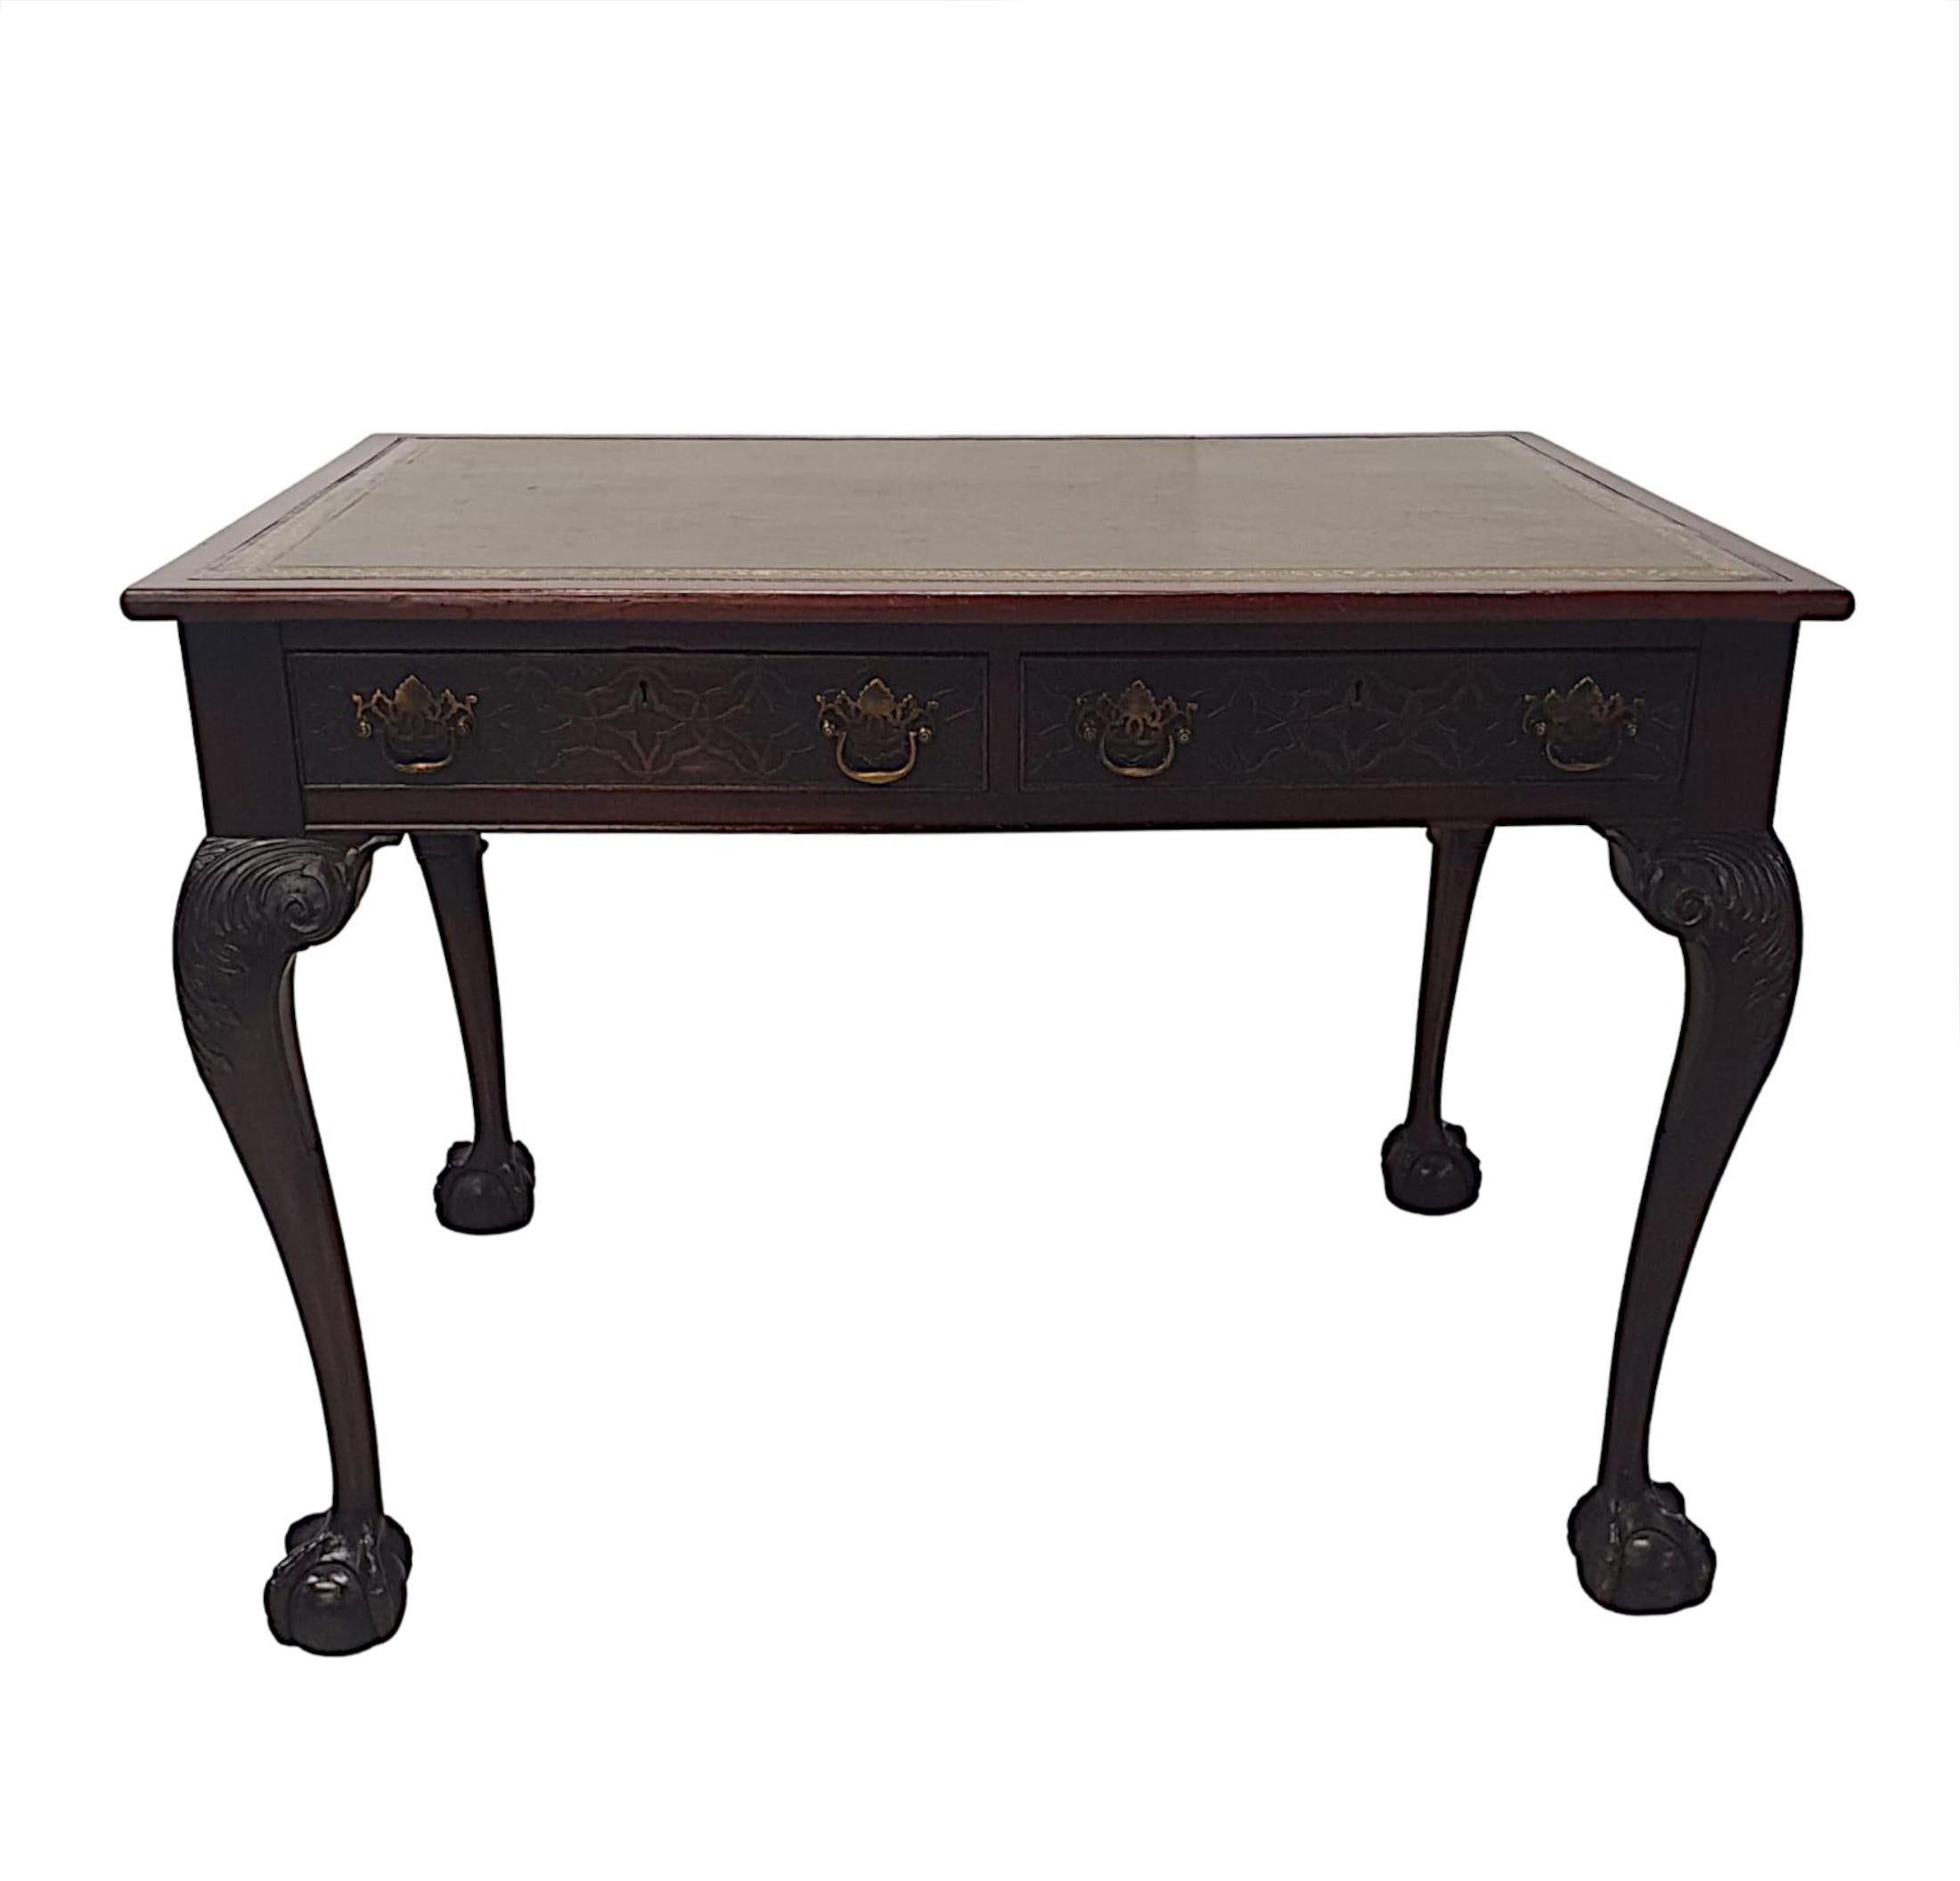 Stunning Late 19th Century Desk in the Thomas Chippendale Manner For Sale 4